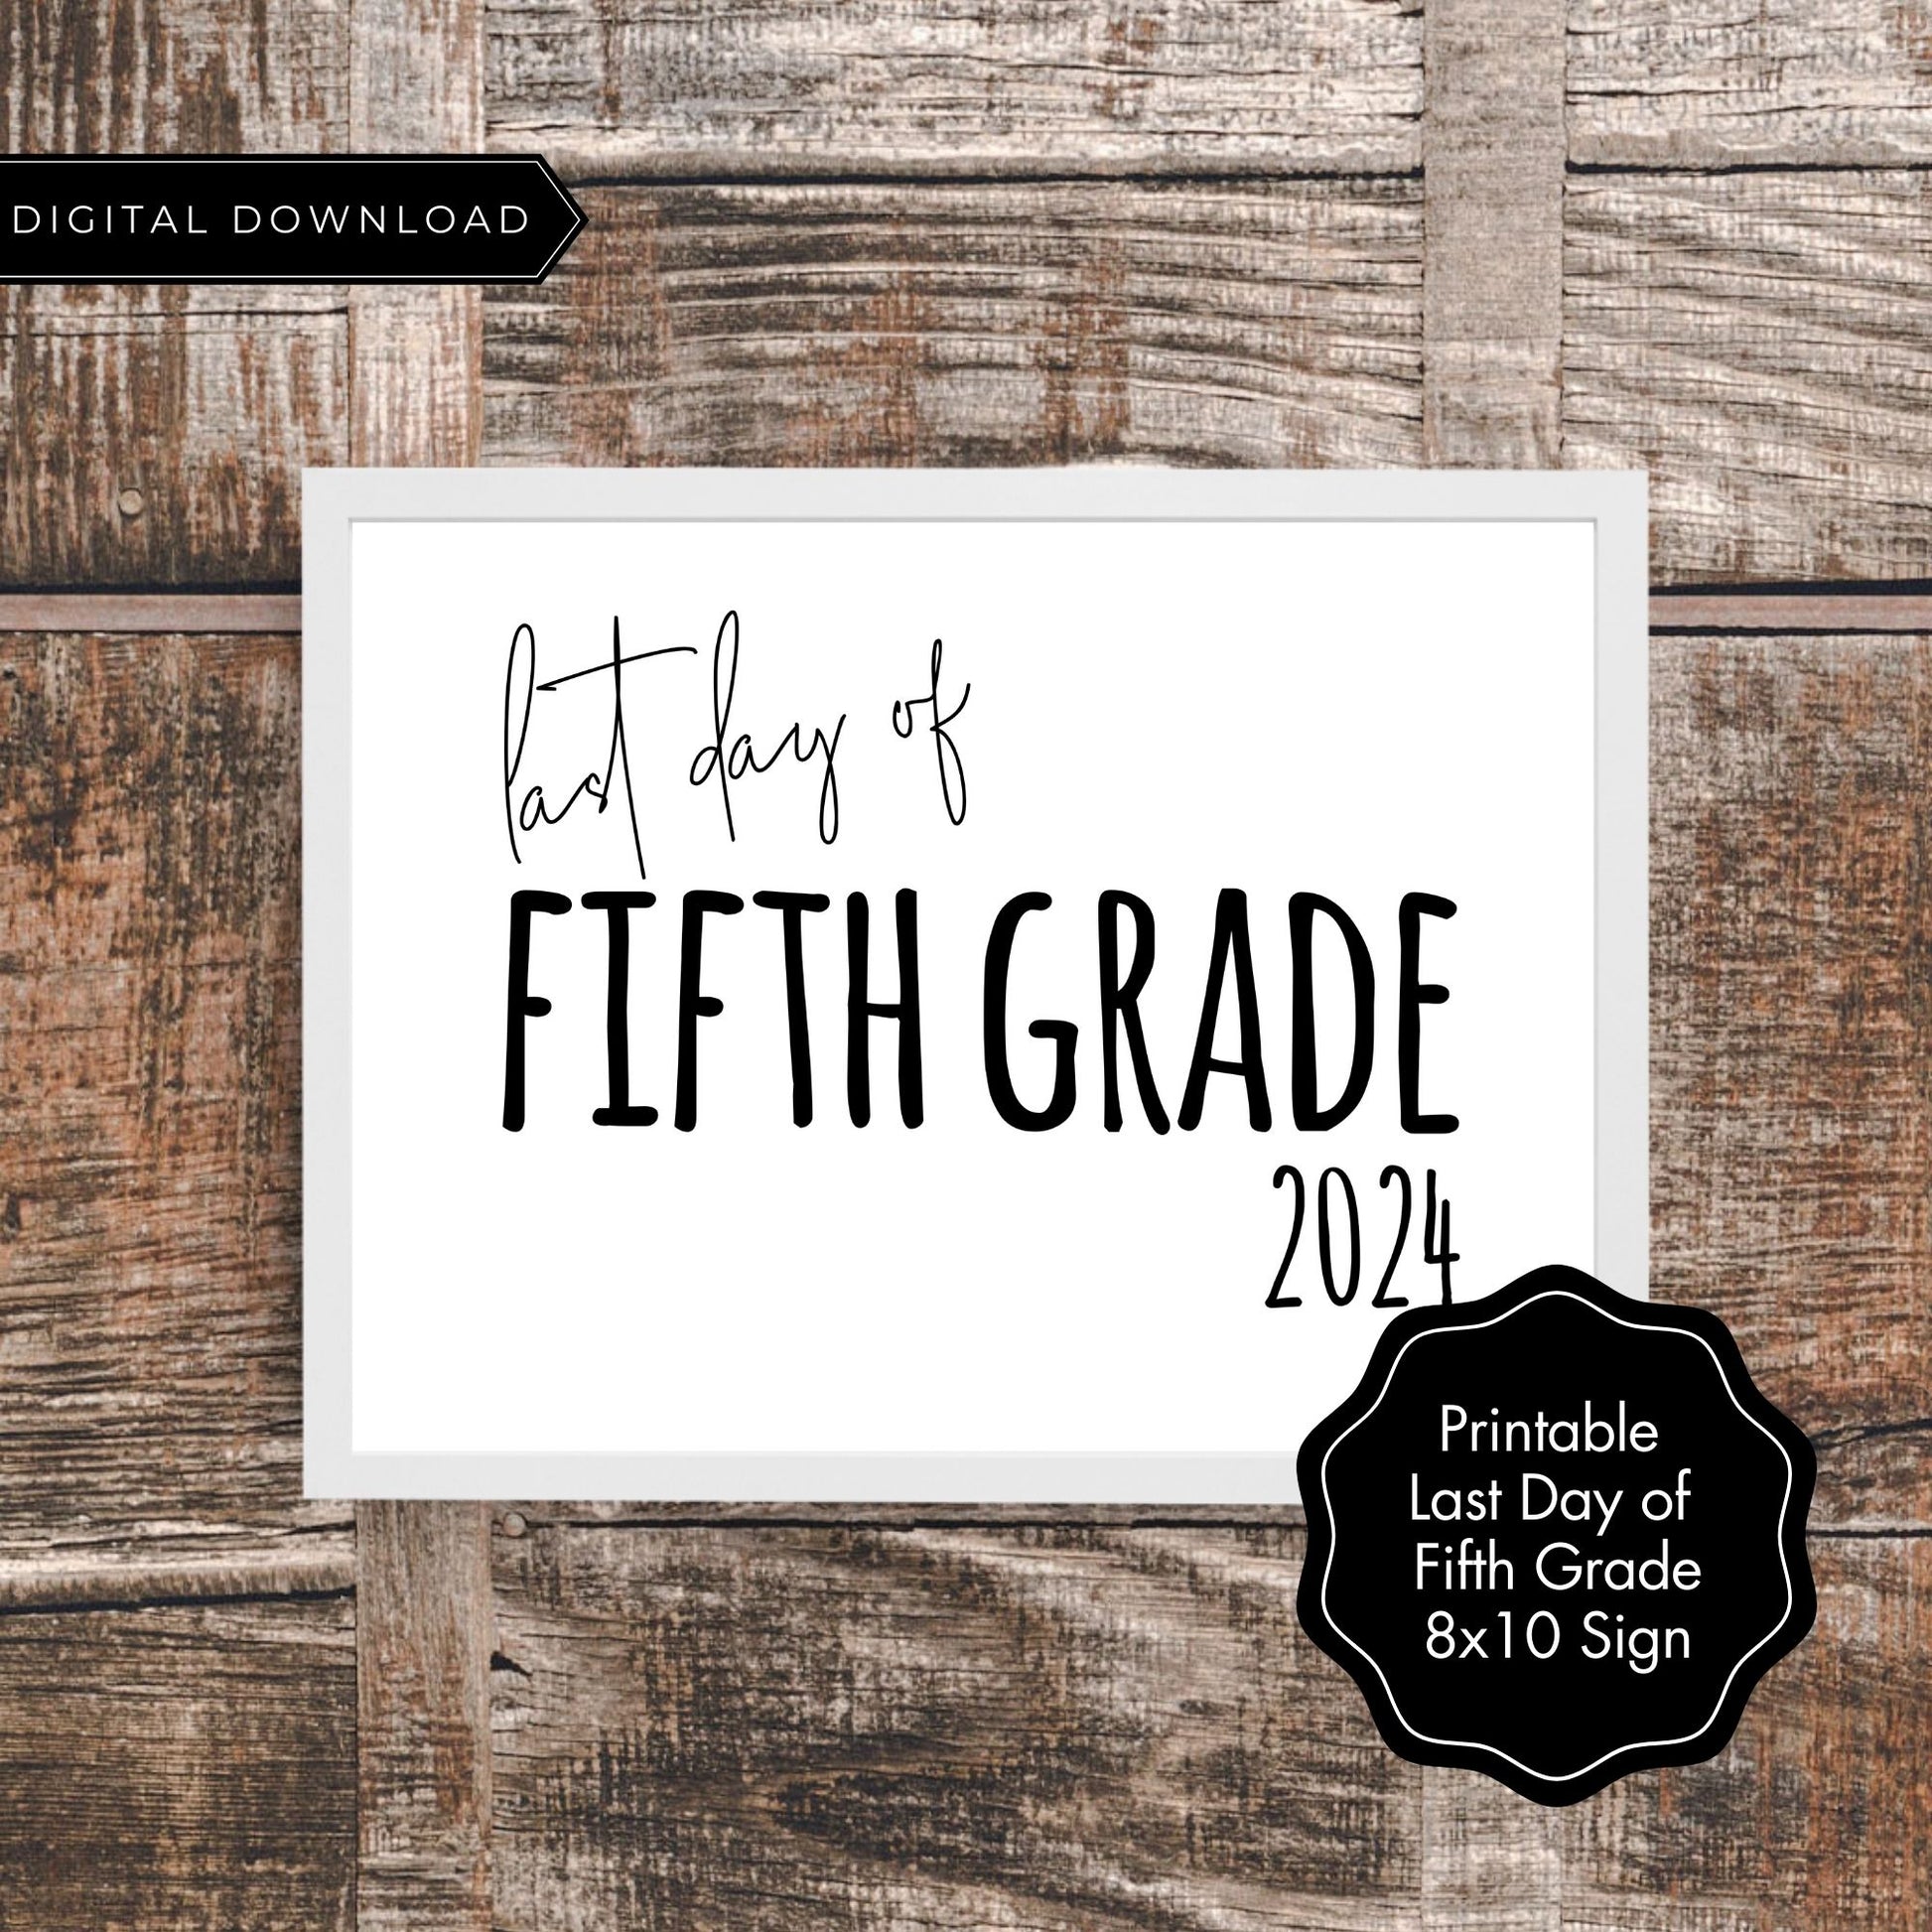 Last Day of Fifth Grade 2024 Printable Sign